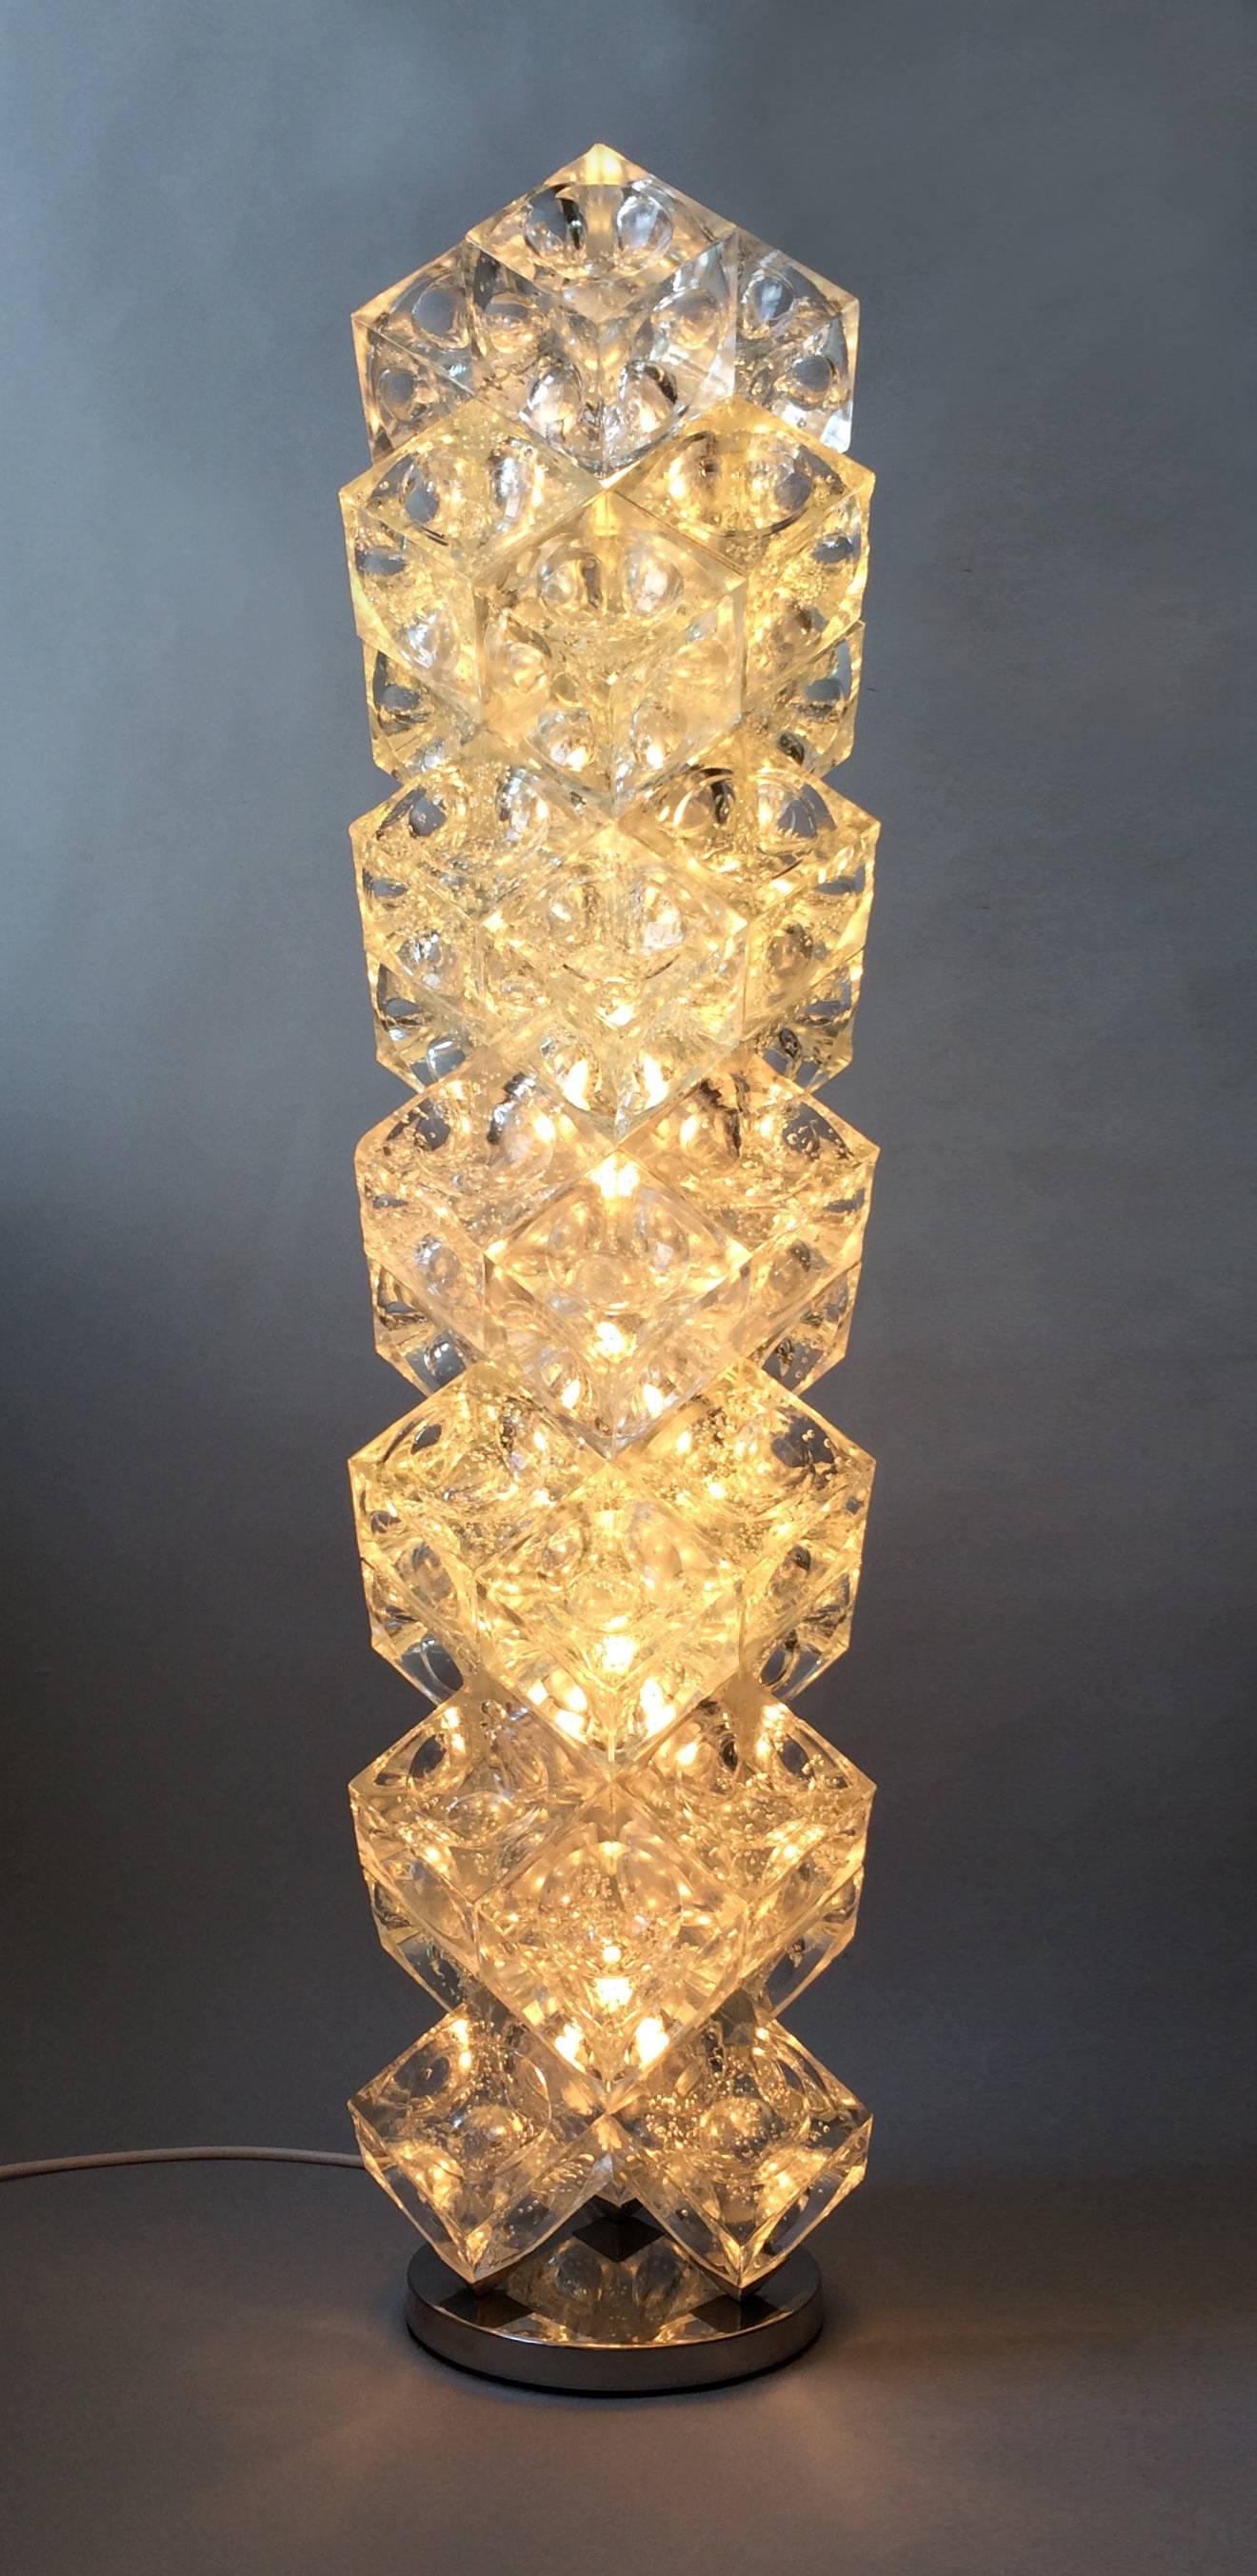 Composition including 36-cube unrefined glass component parts with an internal hemispheric groove and a stainless steel base. The light is divided into seven sections with six internal light bulbs.
